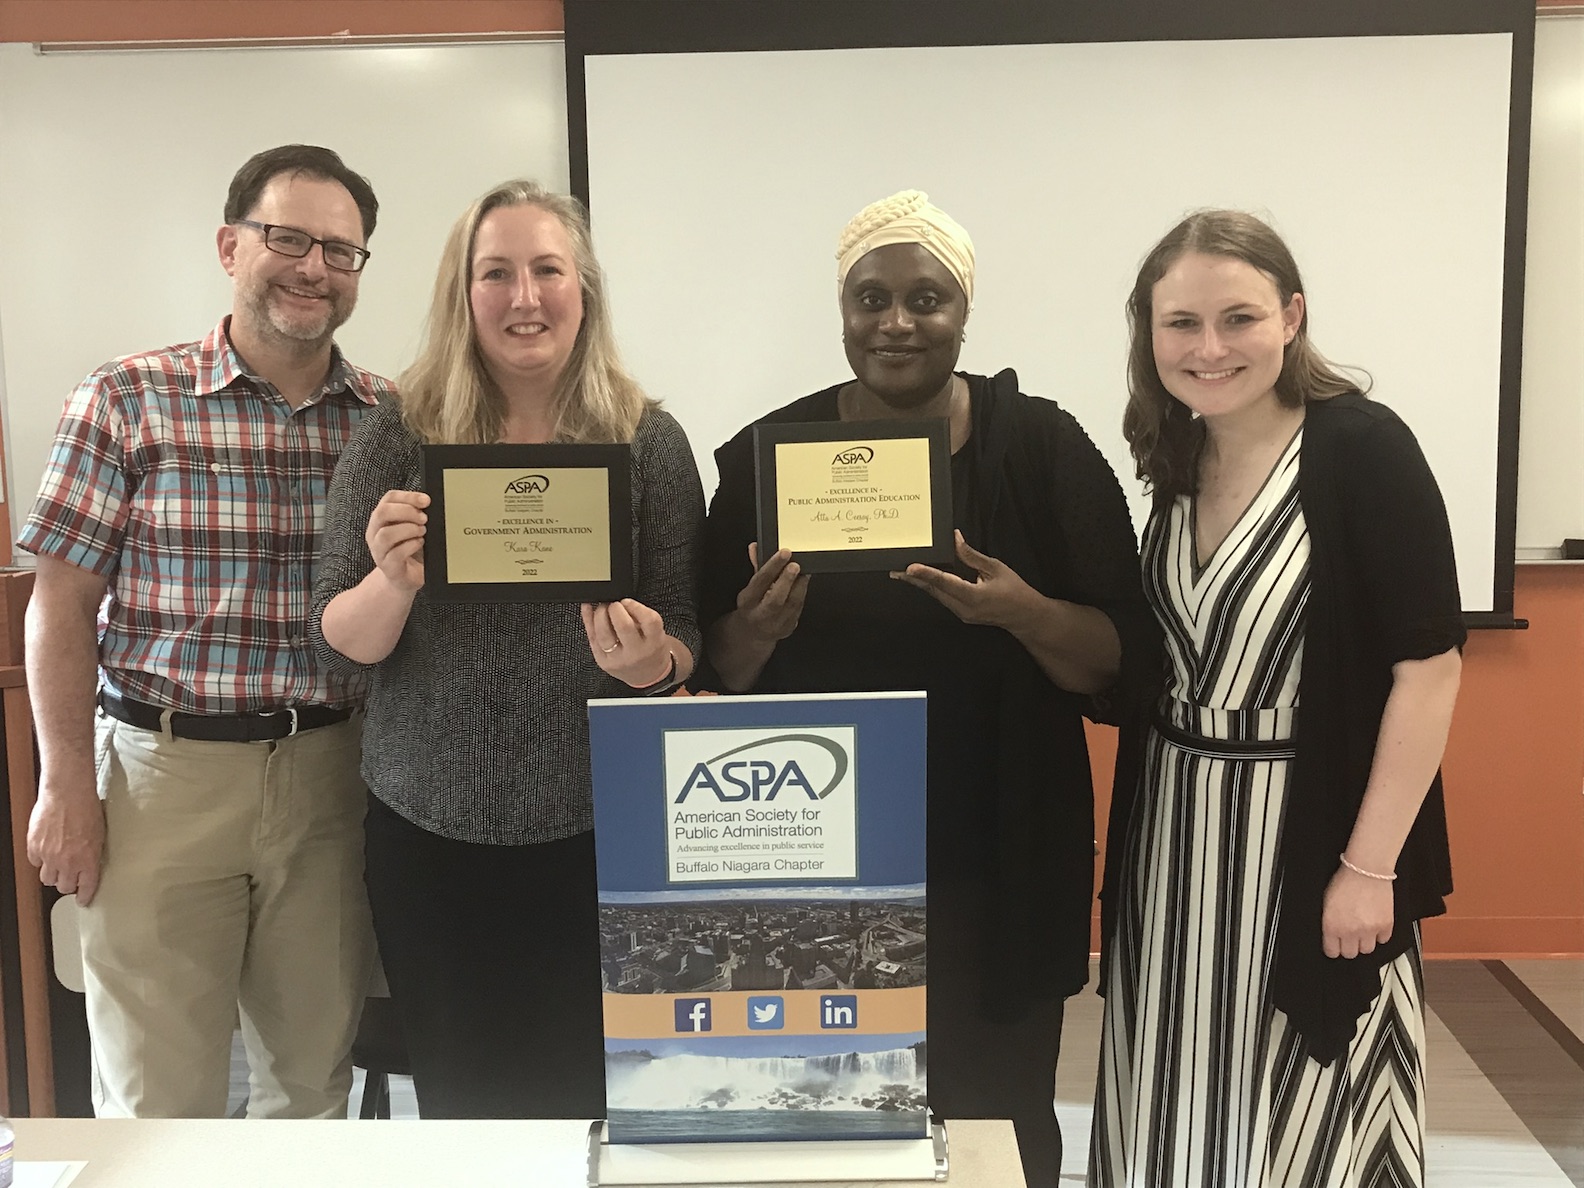 Pictured, from left: Chris Marcello, MPA; Kara Kane, MA; Atta A. Ceesay, Ph.D.; and Makenzie Docteur, MPA. (Submitted photos)